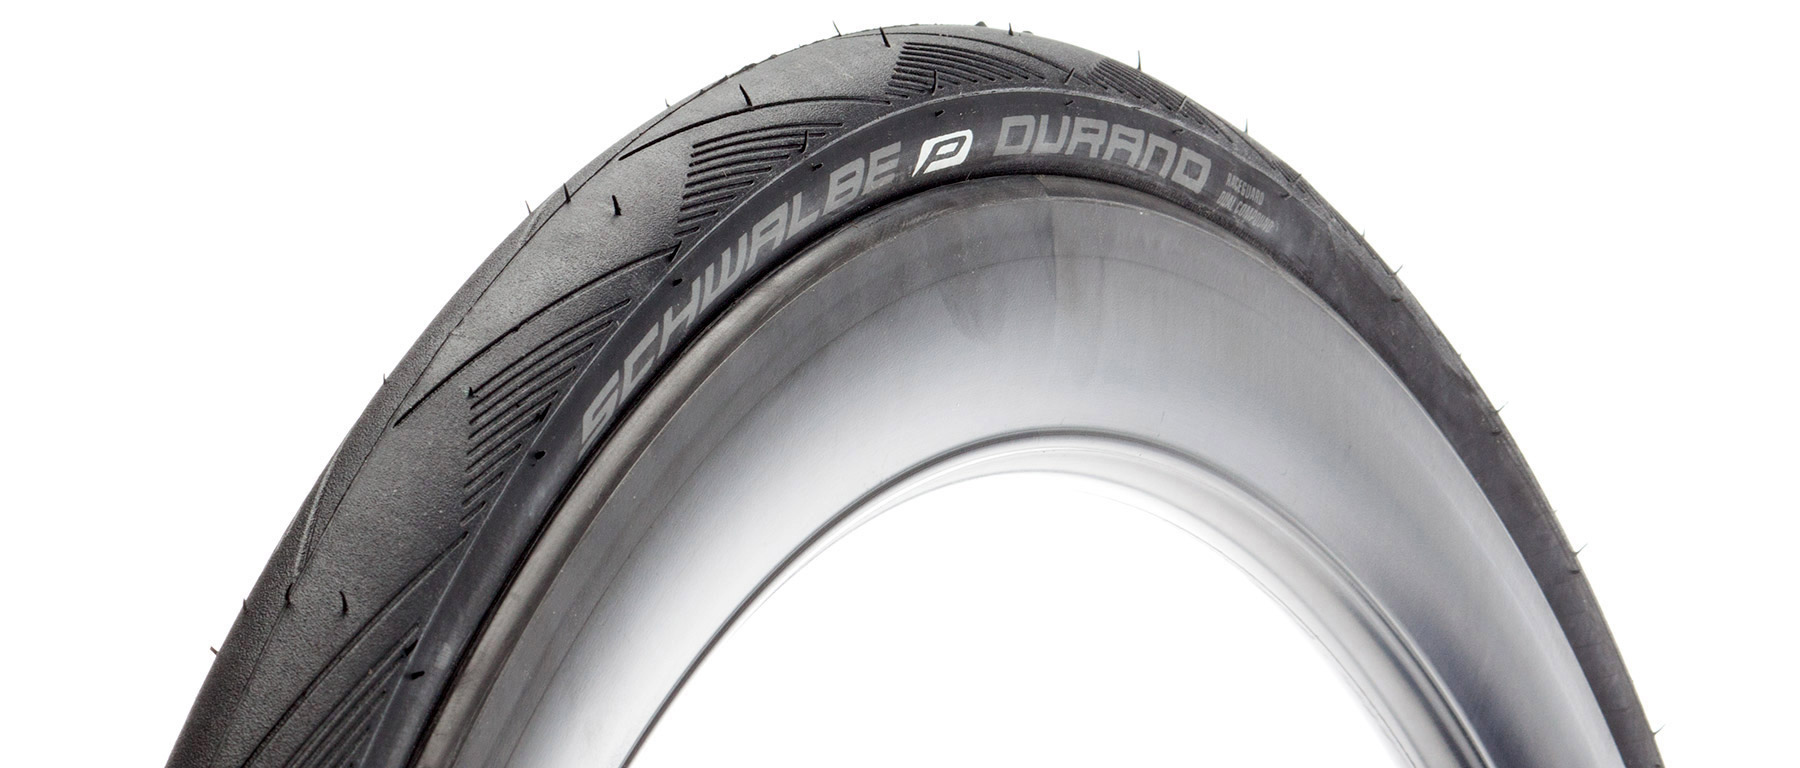 Schwalbe Durano Race Guard Tire Excel Sports | Shop Online From Boulder ...